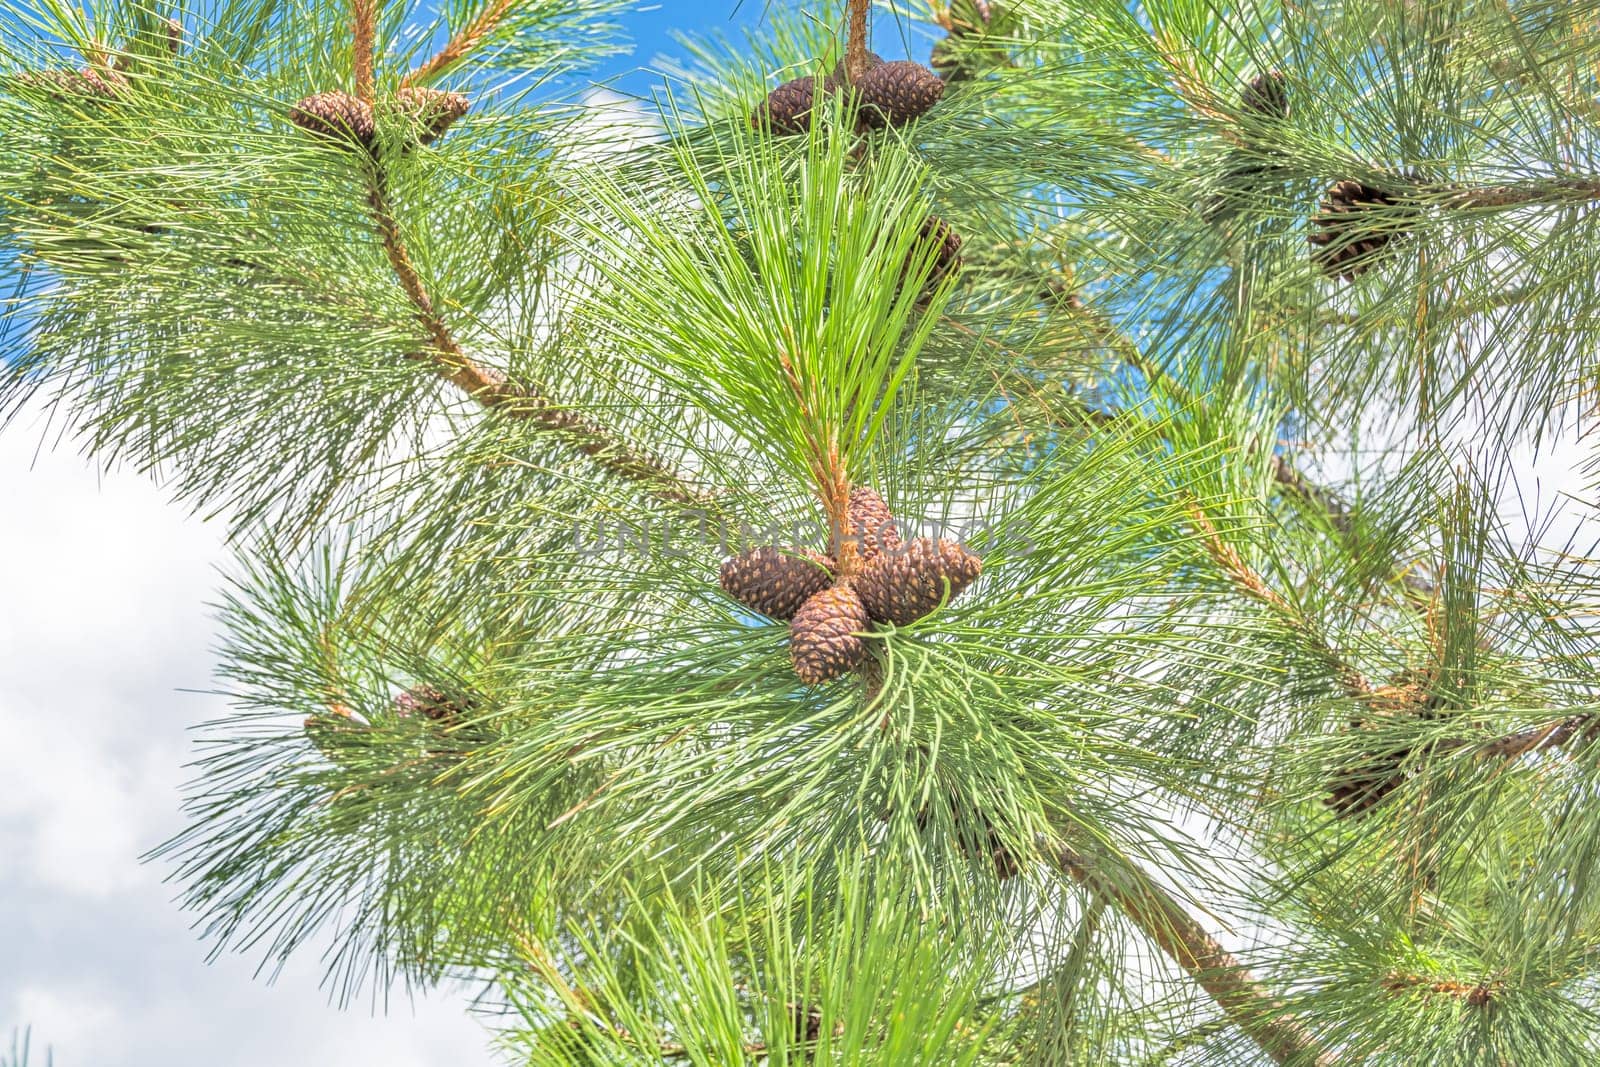 Pine cones on the branch on blue sky background by Imagenet